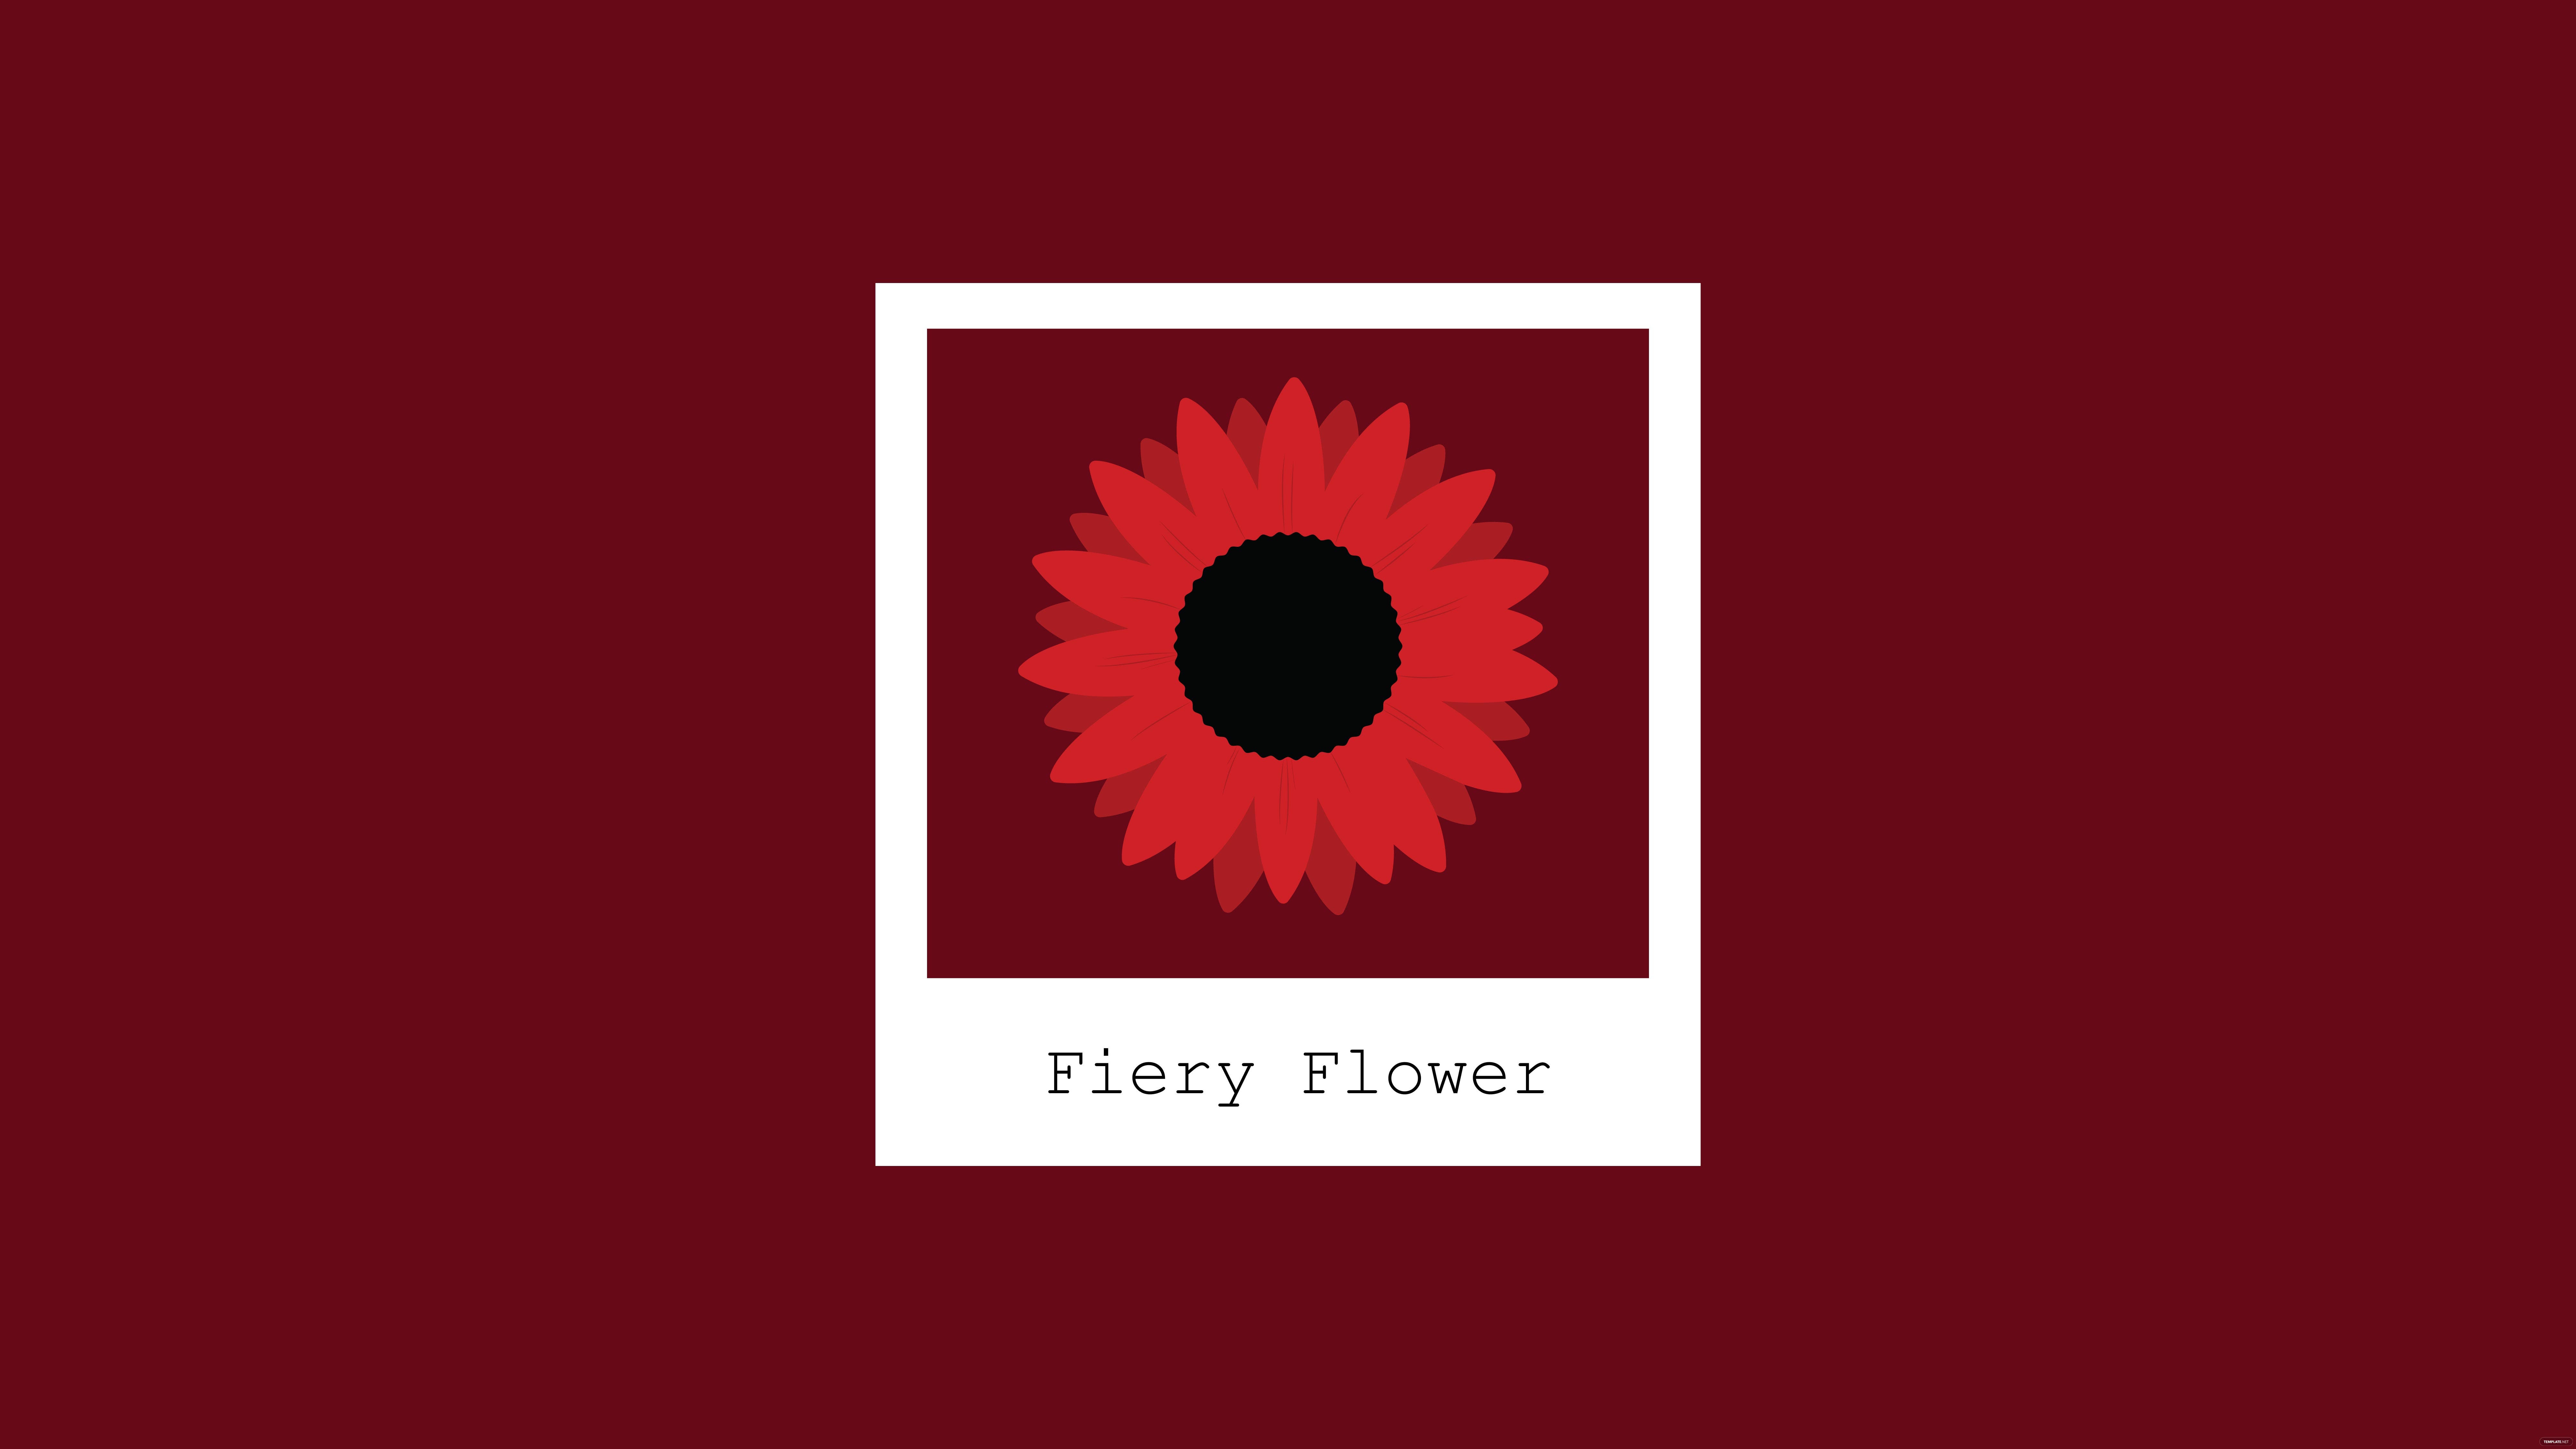 Red Sunflower Wallpapers